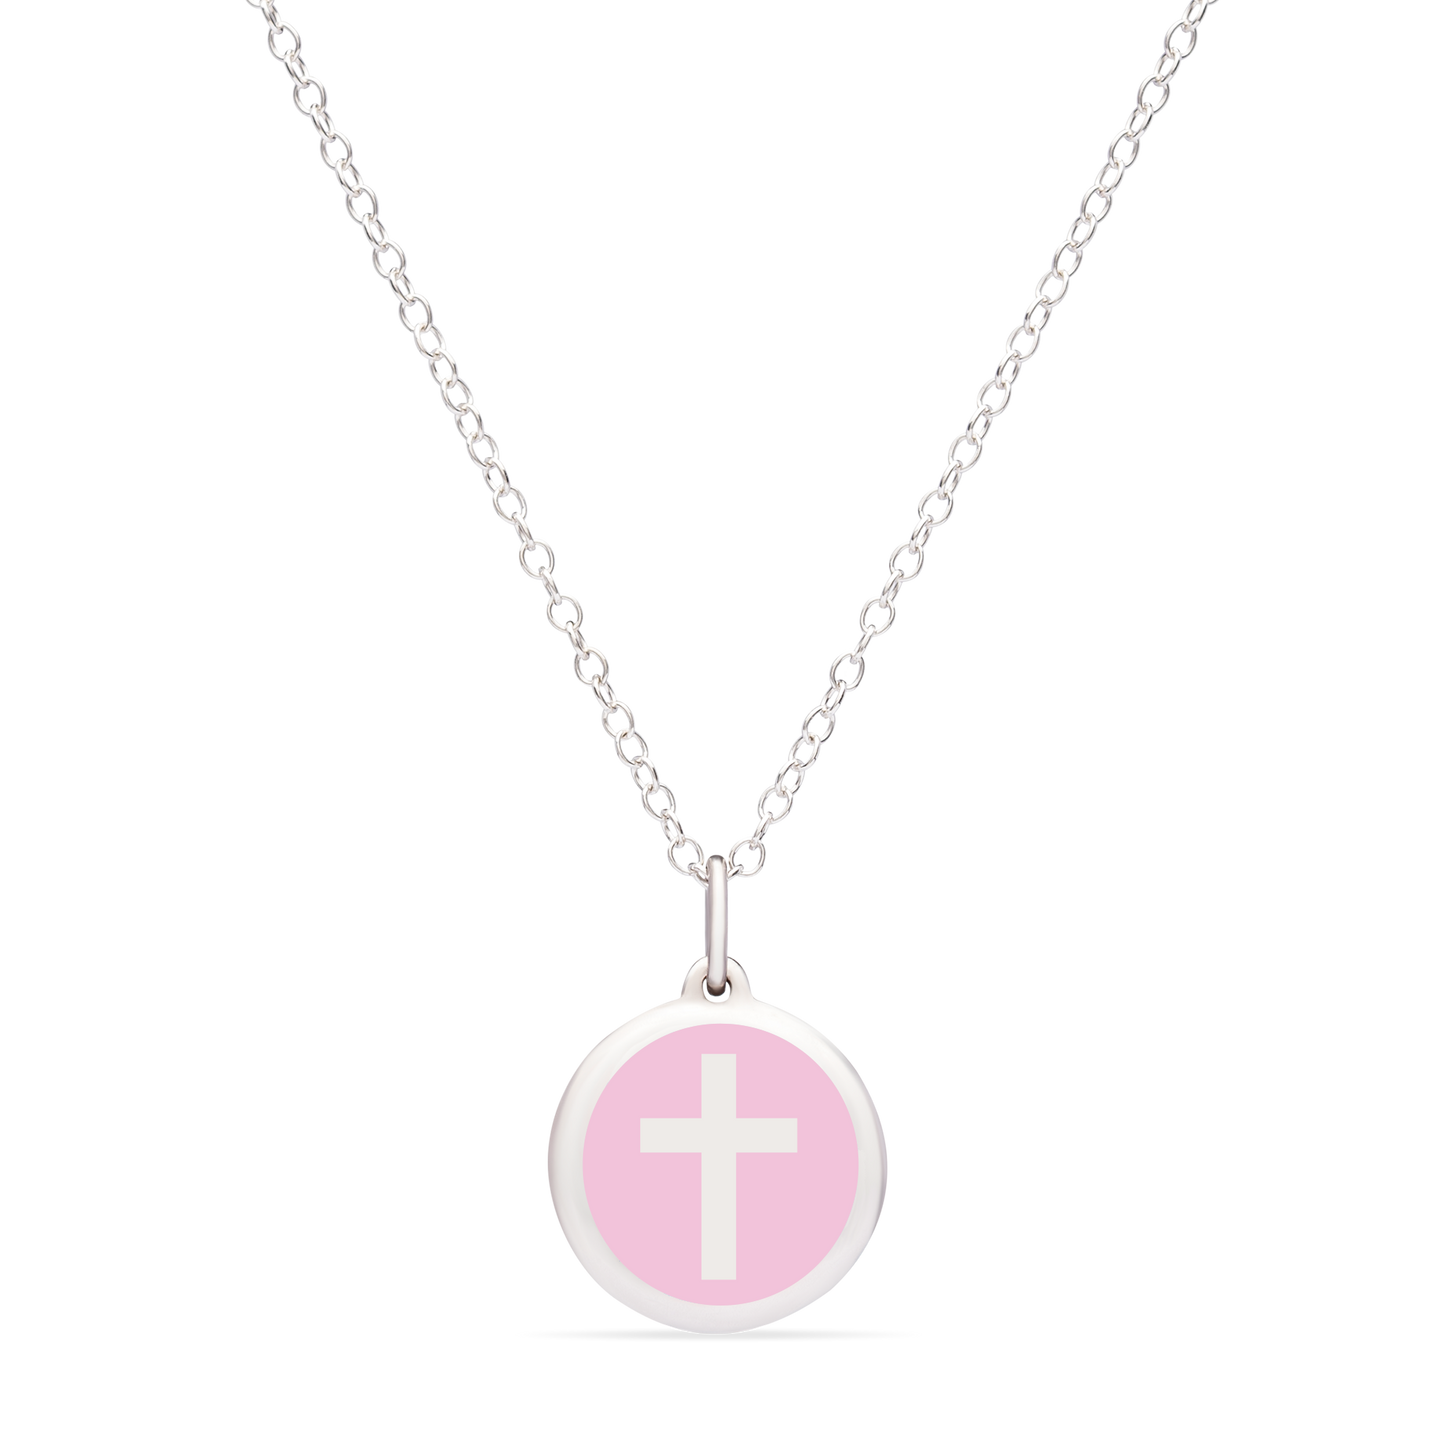 MINI CROSS CHARM sterling silver with rhodium plate